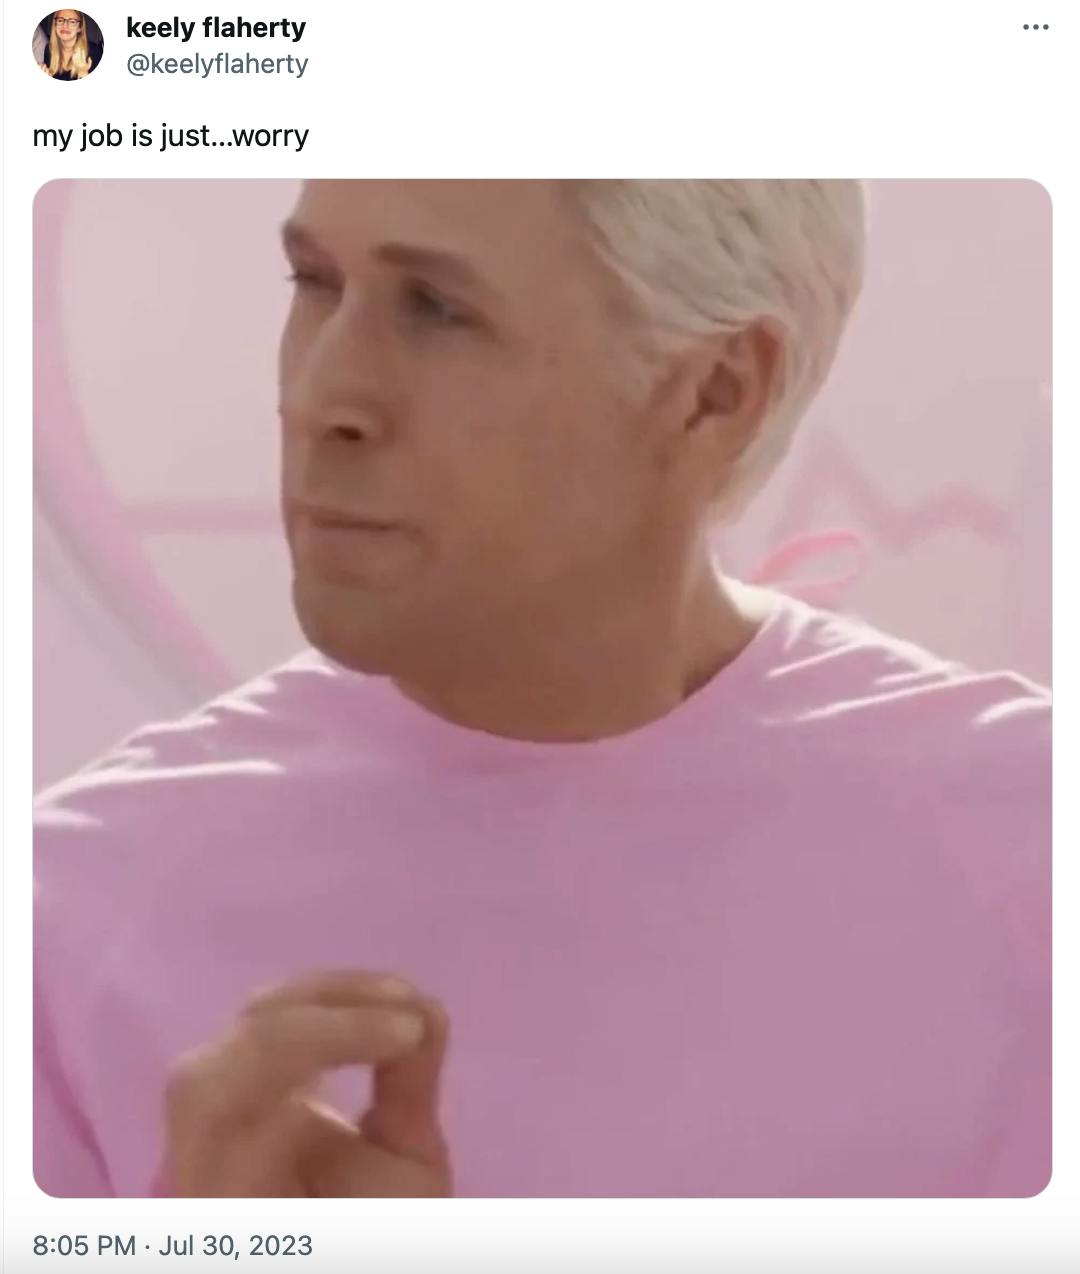 ken in the barbie movie as he's relaying how his job is just beach